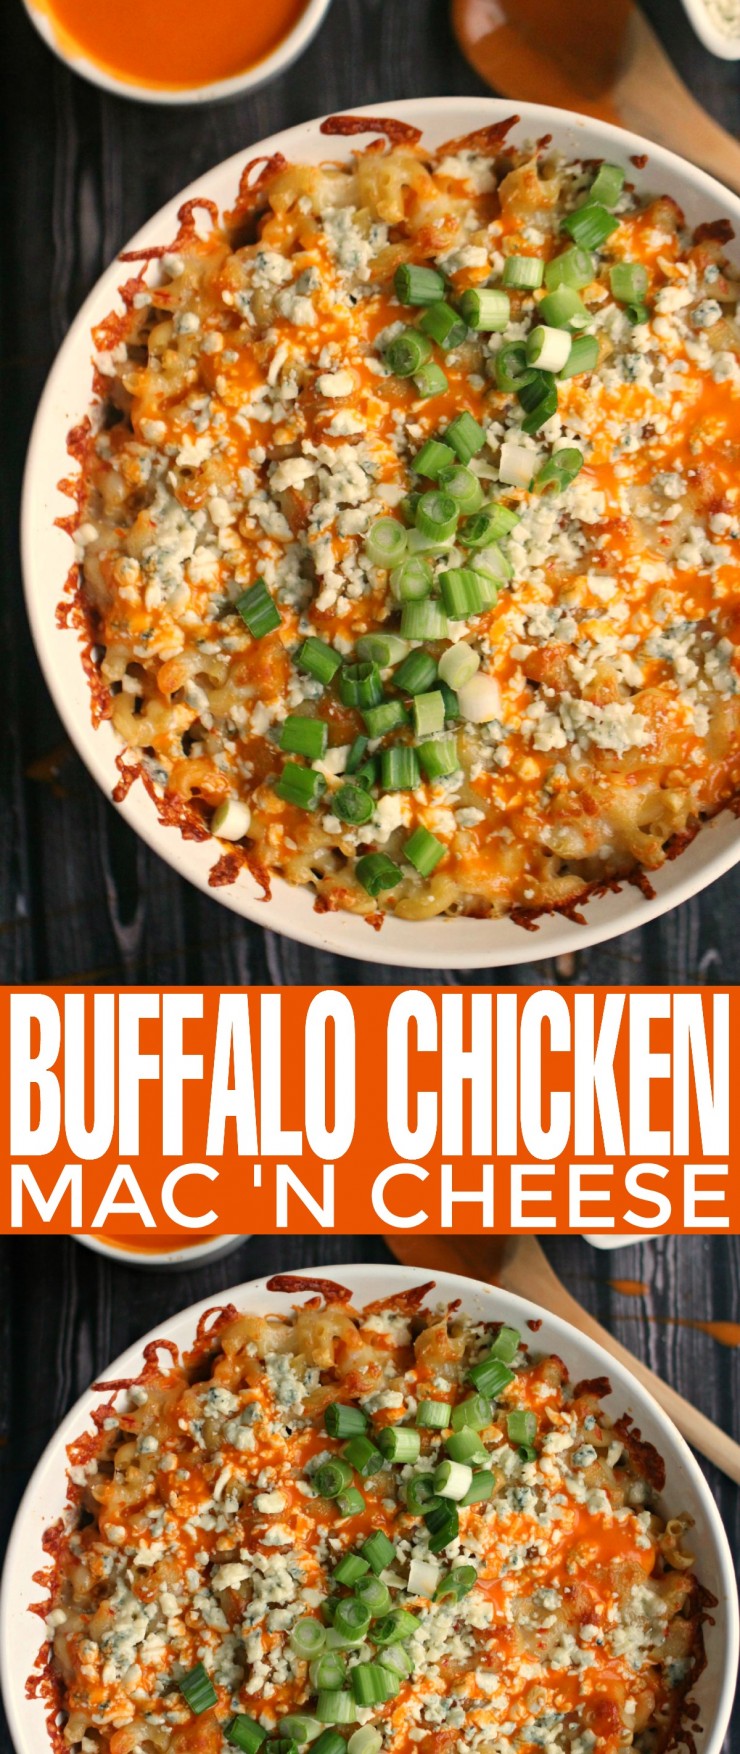 This incredible recipe for Buffalo Chicken Mac 'n Cheese is a gourmet macaroni and cheese filled with 3 different types of artisan cheese!